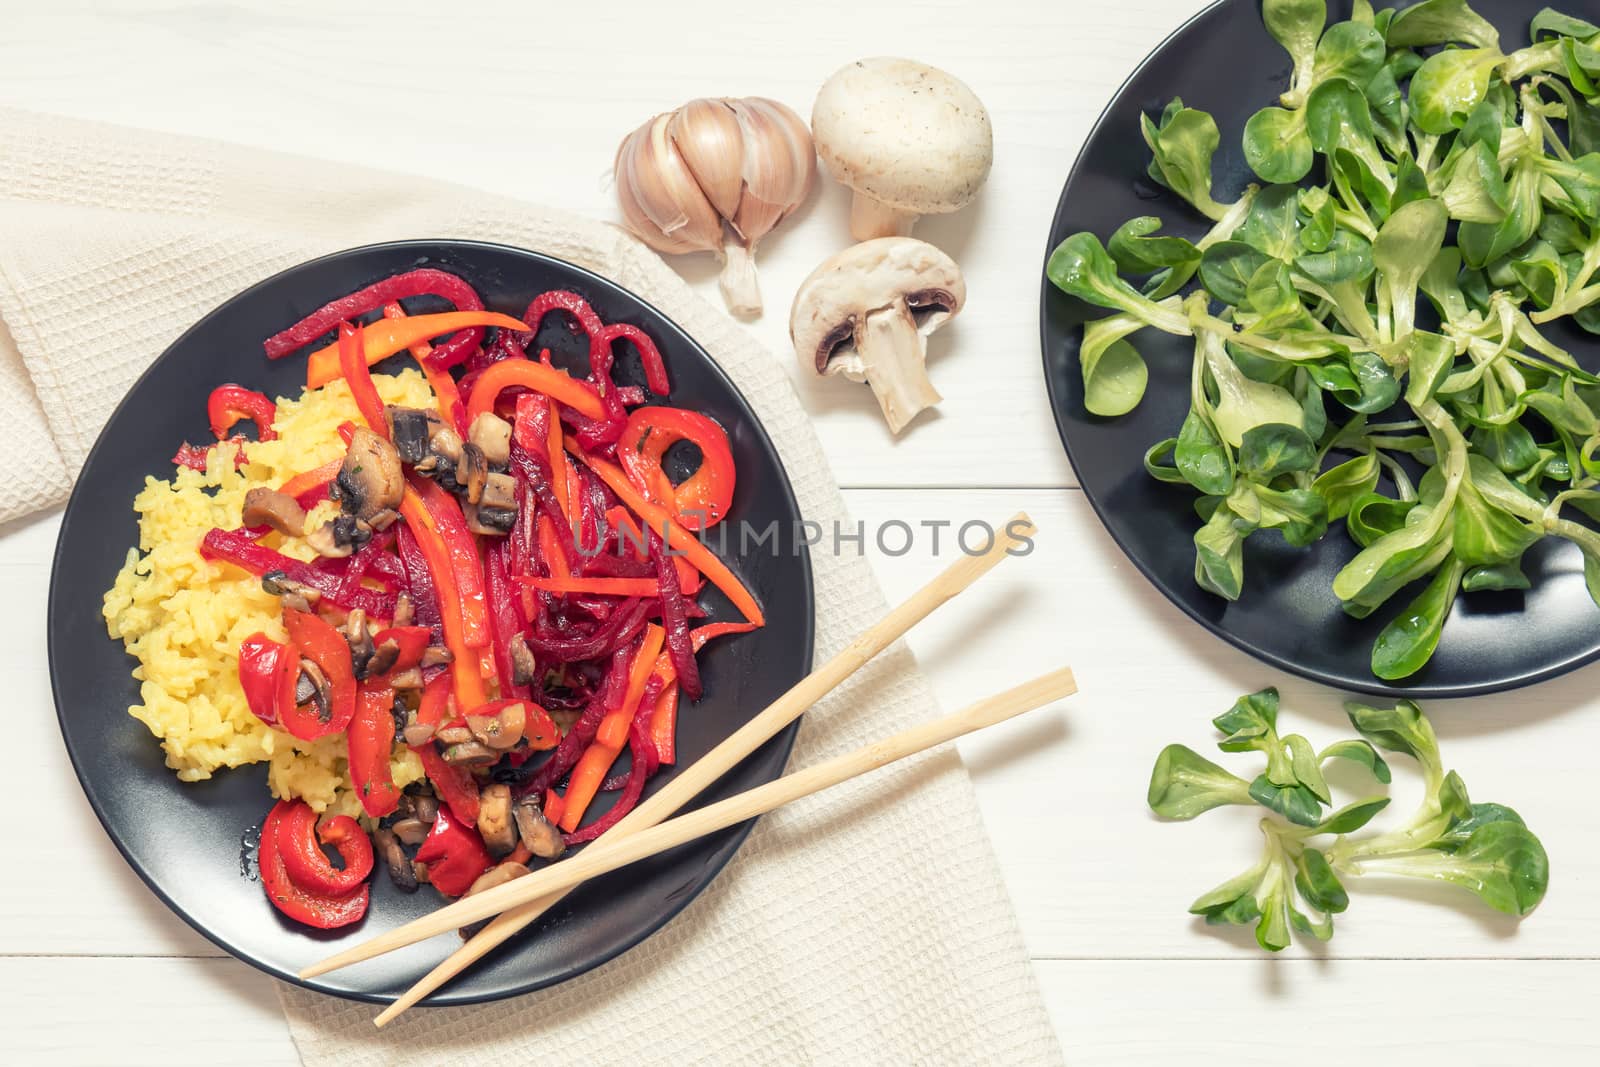 Rice and steamed vegetables on a black plate by ArtSvitlyna